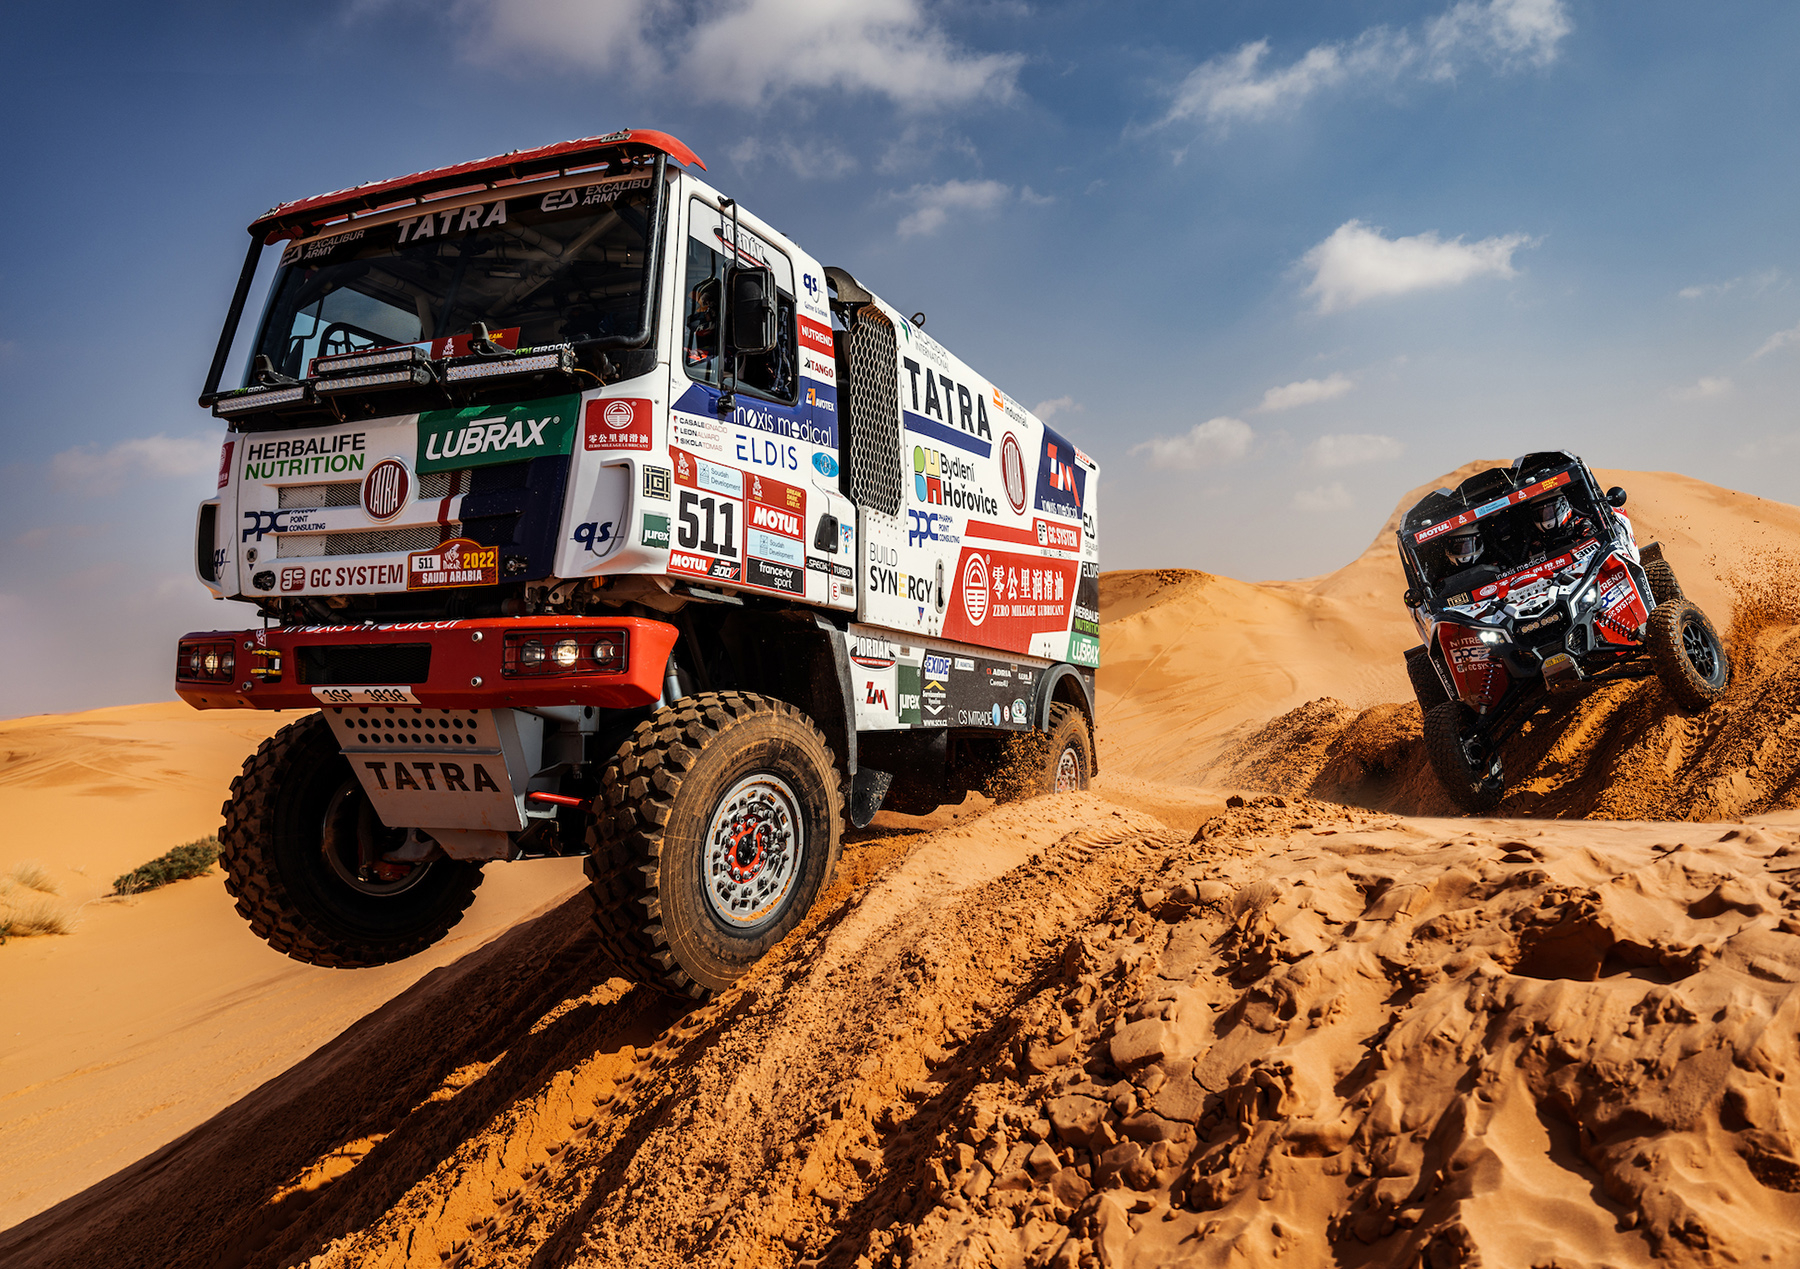 Next year's Dakar Rally promises more deserts and more challenging stages.  Buggyra is excited about the challenge.